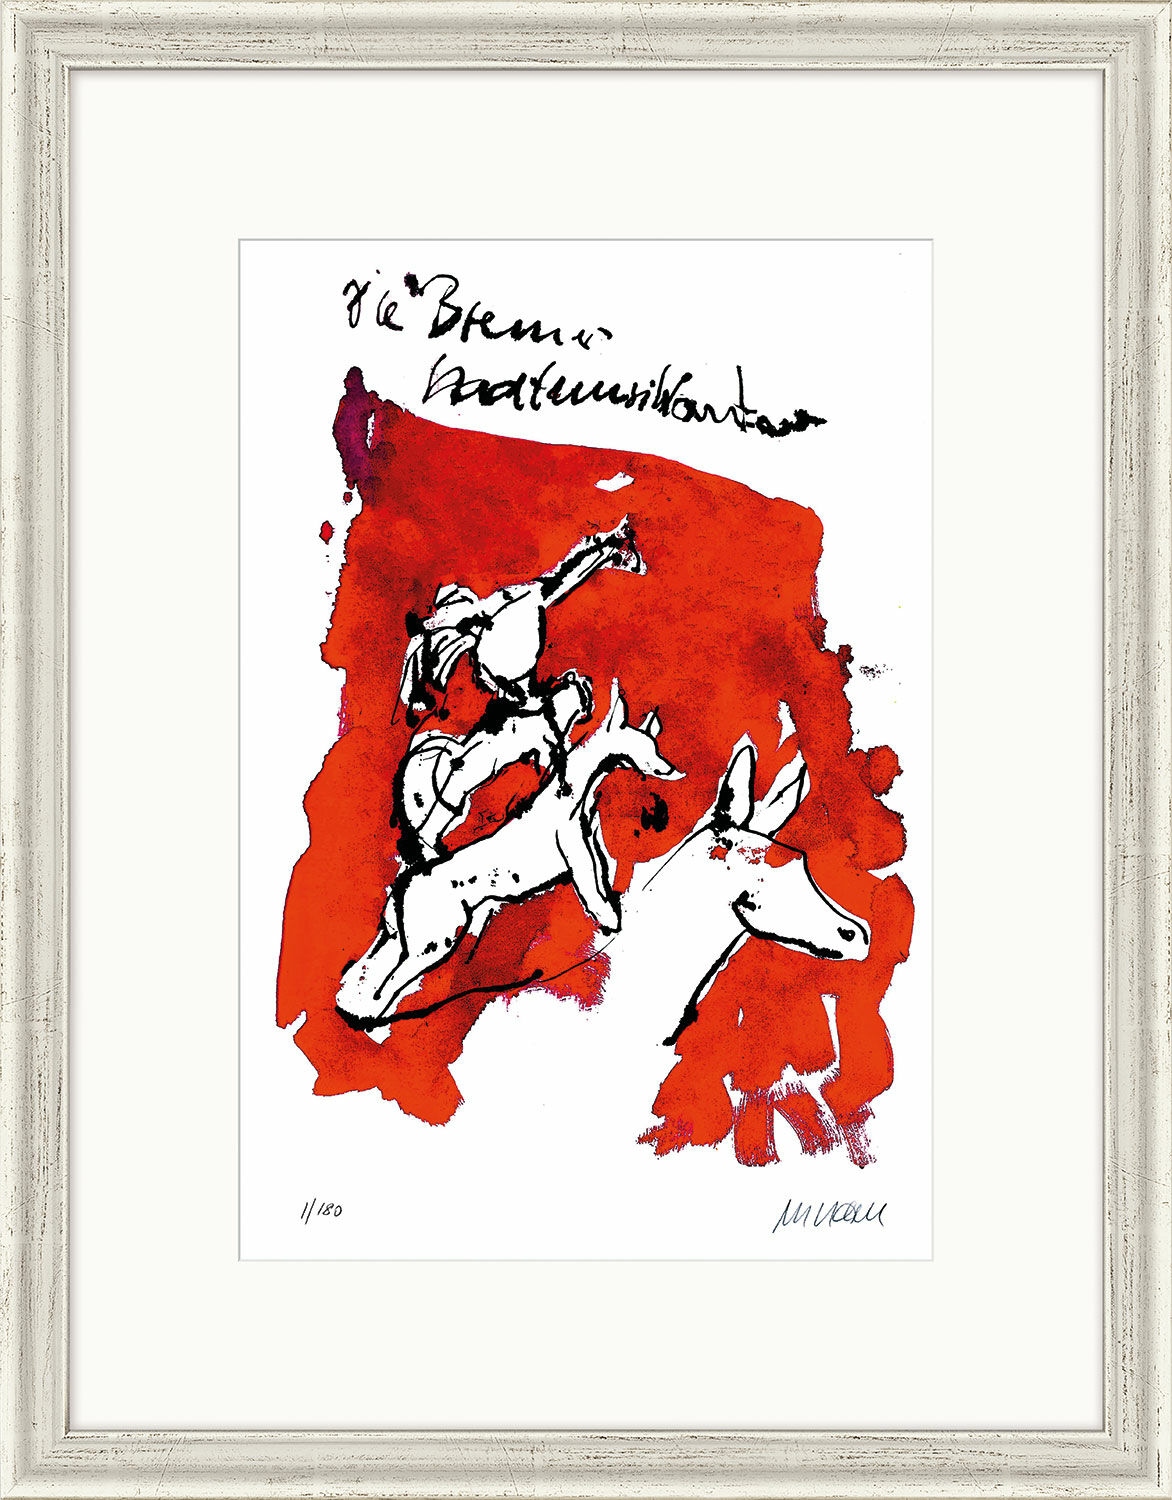 Picture "Town Musicians of Bremen" (2021), silver-coloured framed version by Armin Mueller-Stahl